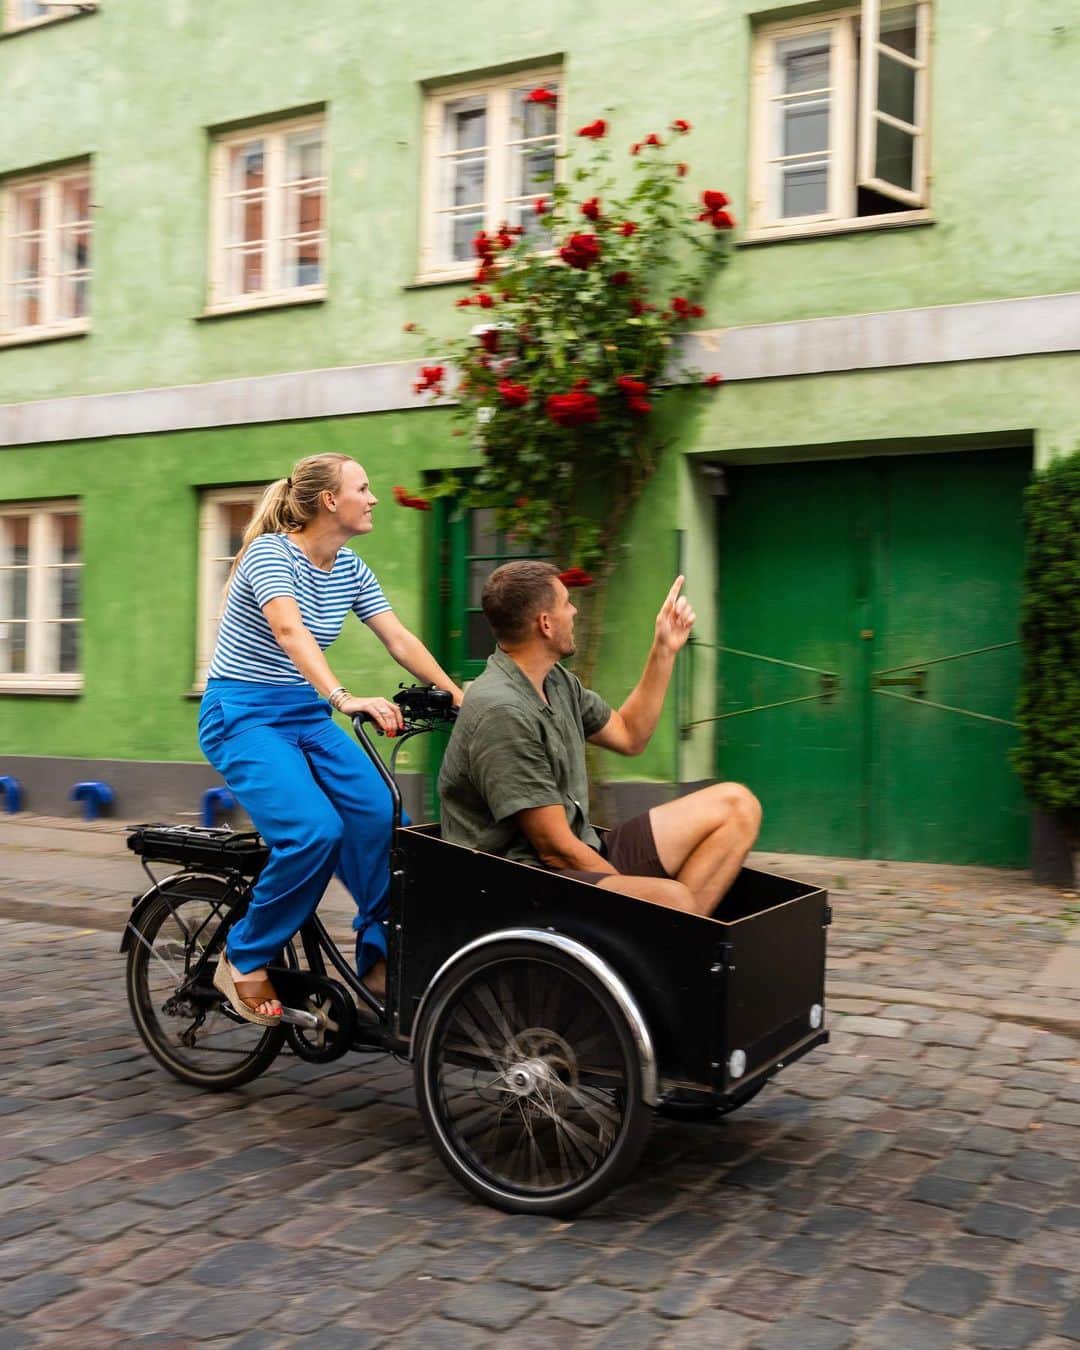 CarolineWozniackiのインスタグラム：「Hey everyone! 🚴‍♀️ @carowozniacki here. Let's talk about getting around in Copenhagen. @davidlee and I had a blast testing a cargo bike, all thanks to my collaboration with @VisitCopenhagen! 👇  Did you know that Copenhagen has proudly been holding the title of the most bicycle-friendly capital since 2015? Pedaling through this city is not just a mode of transport but a way of life. Picture this: curb-separated bicycle tracks, charming bike bridges over the canals, dedicated cycle superhighways, and even traffic lights and green waves designed for two-wheeled commuters. Bikes outnumber cars, and here, taking your kids to school in a cargo bike is cooler than cruising in an SUV. And let's not forget about the iconic harbour busses were you can bring your bike and smoothly glide along the waterways. The stunning waterfront views make every ride an experience in itself.  Stay tuned as I continue to explore Copenhagen's gems 👋❤️  #beautifuldestinations #instagood #igerscopenhagen #photography #featuremevisitcopenhagen #travel #visitcopenhagen #ibyen #copenhagen #denmark #cphpicks #sharingcph #delditkbh #wanderlust」